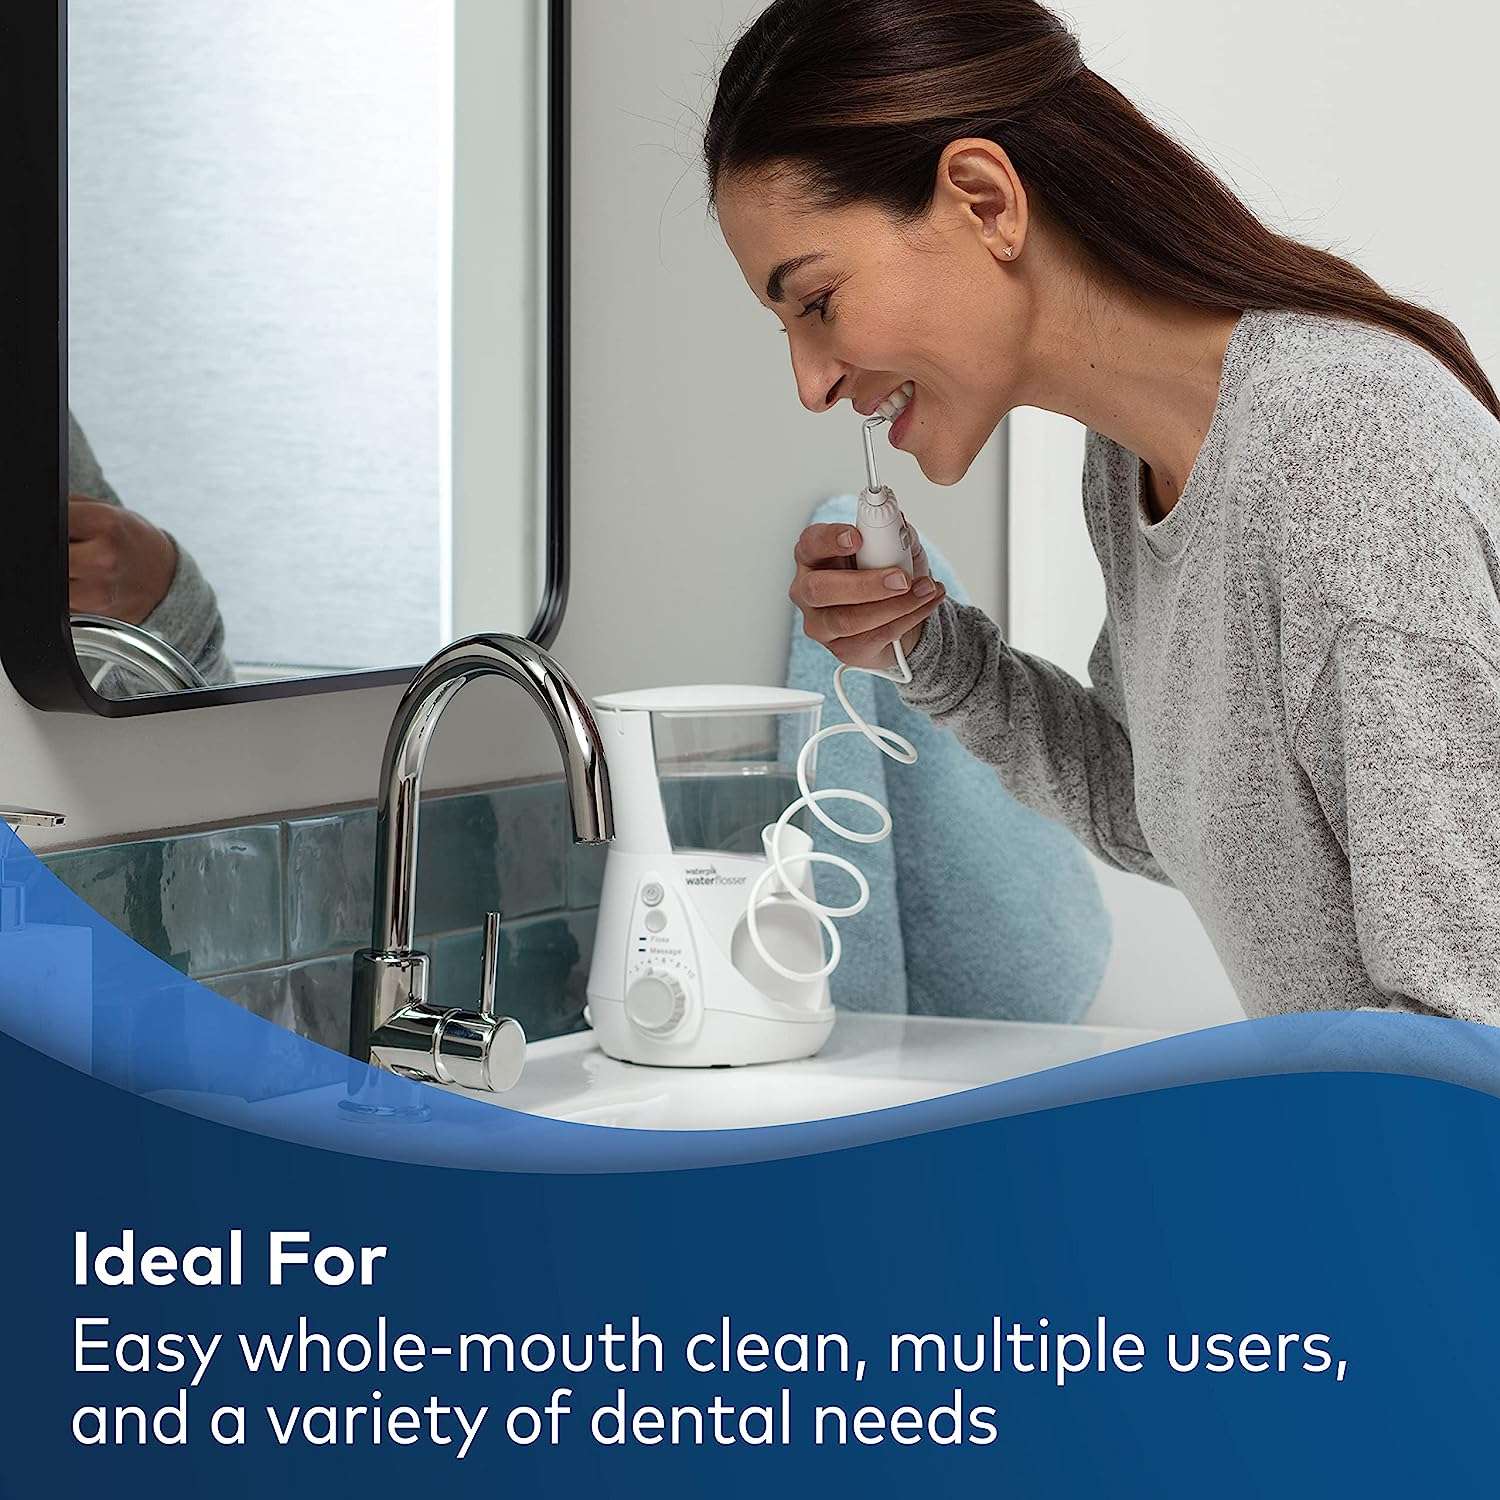 Upgrade Your Oral Care with the Waterpik Aquarius Water Flosser